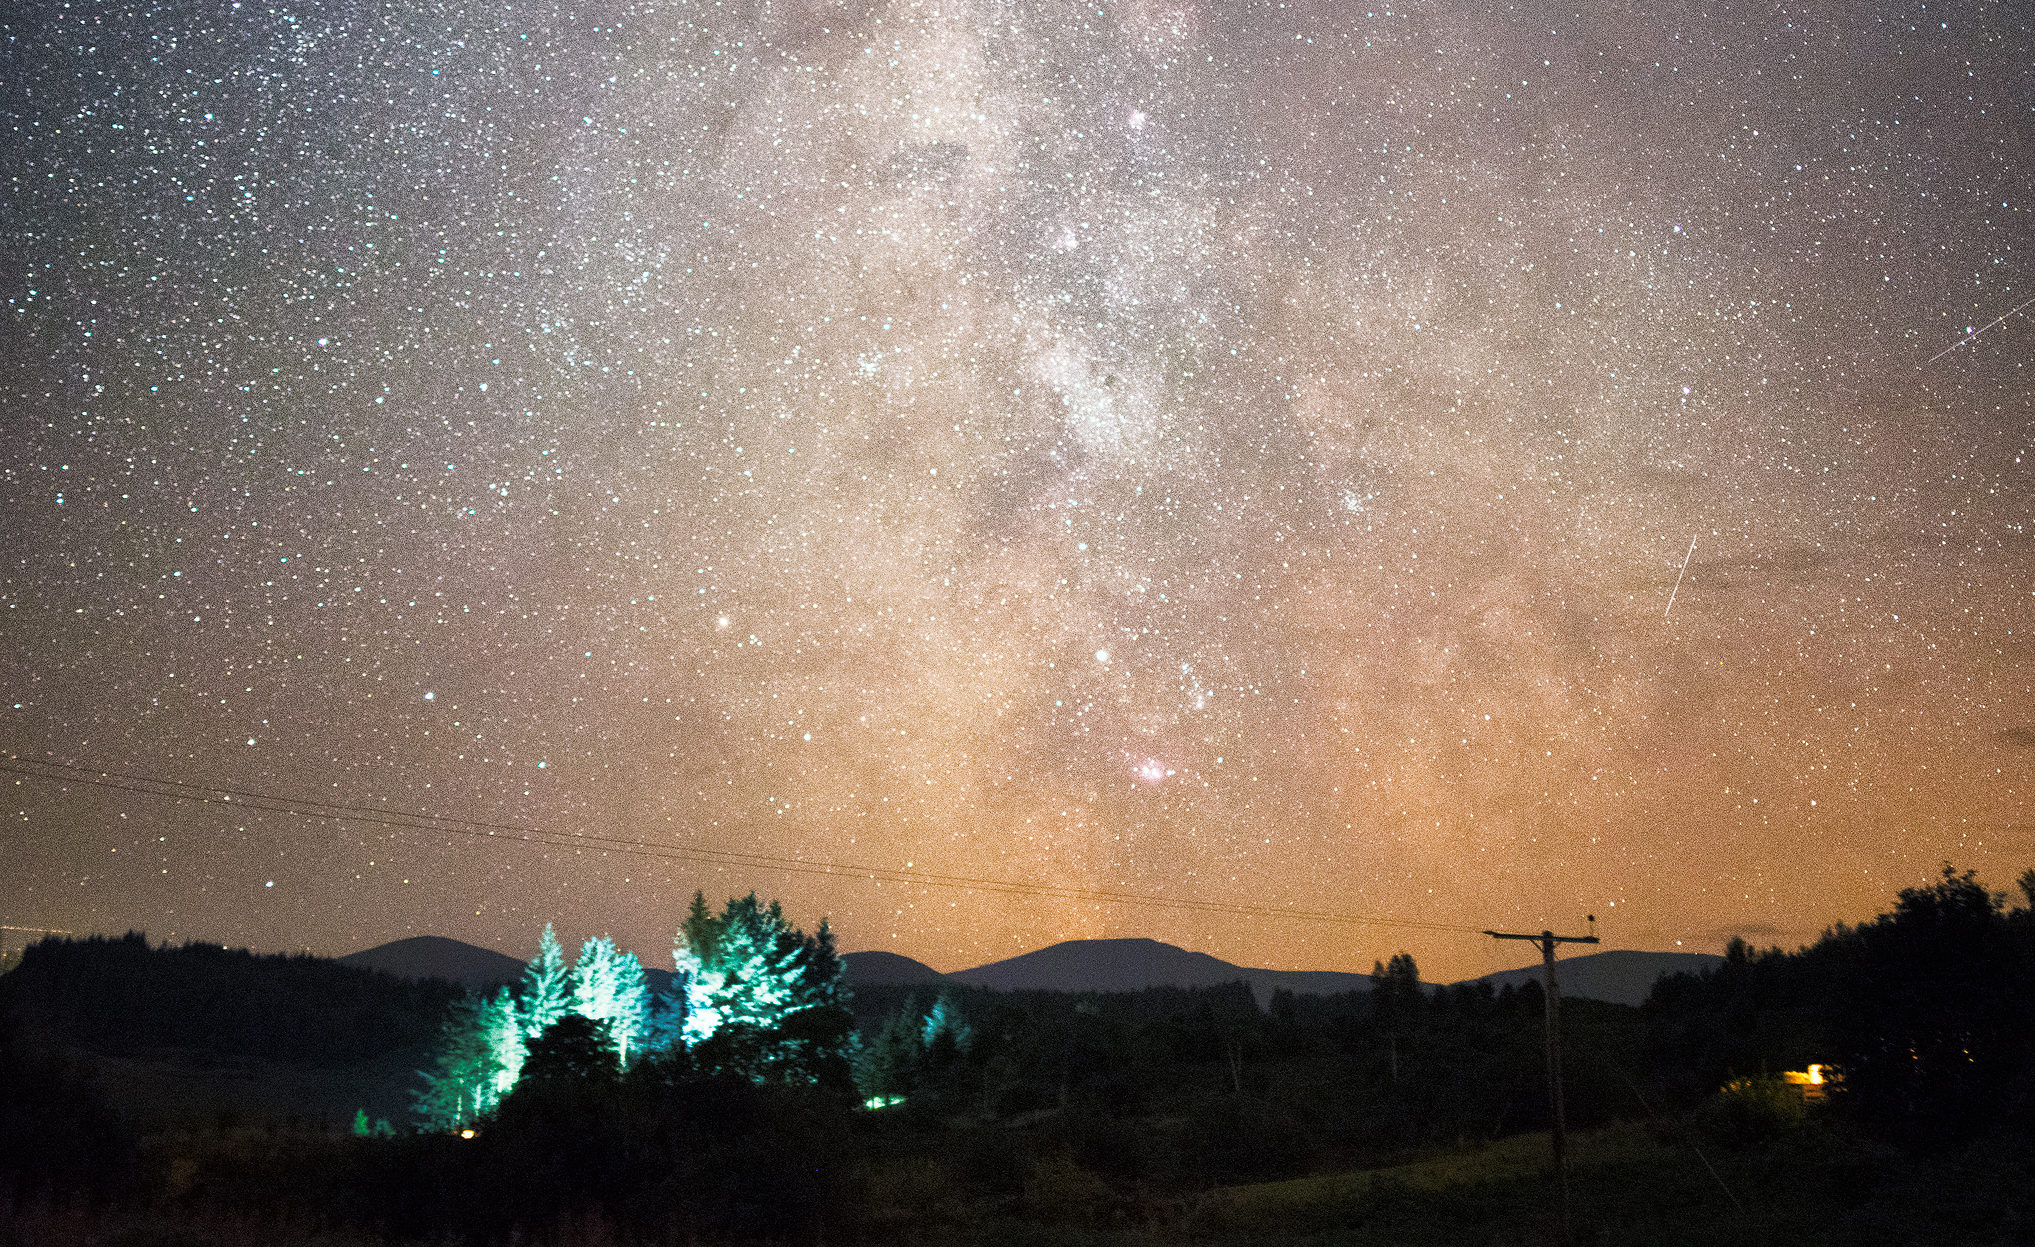 Galloway Forest Park is among the best places to gaze at the stars and the Milky Way